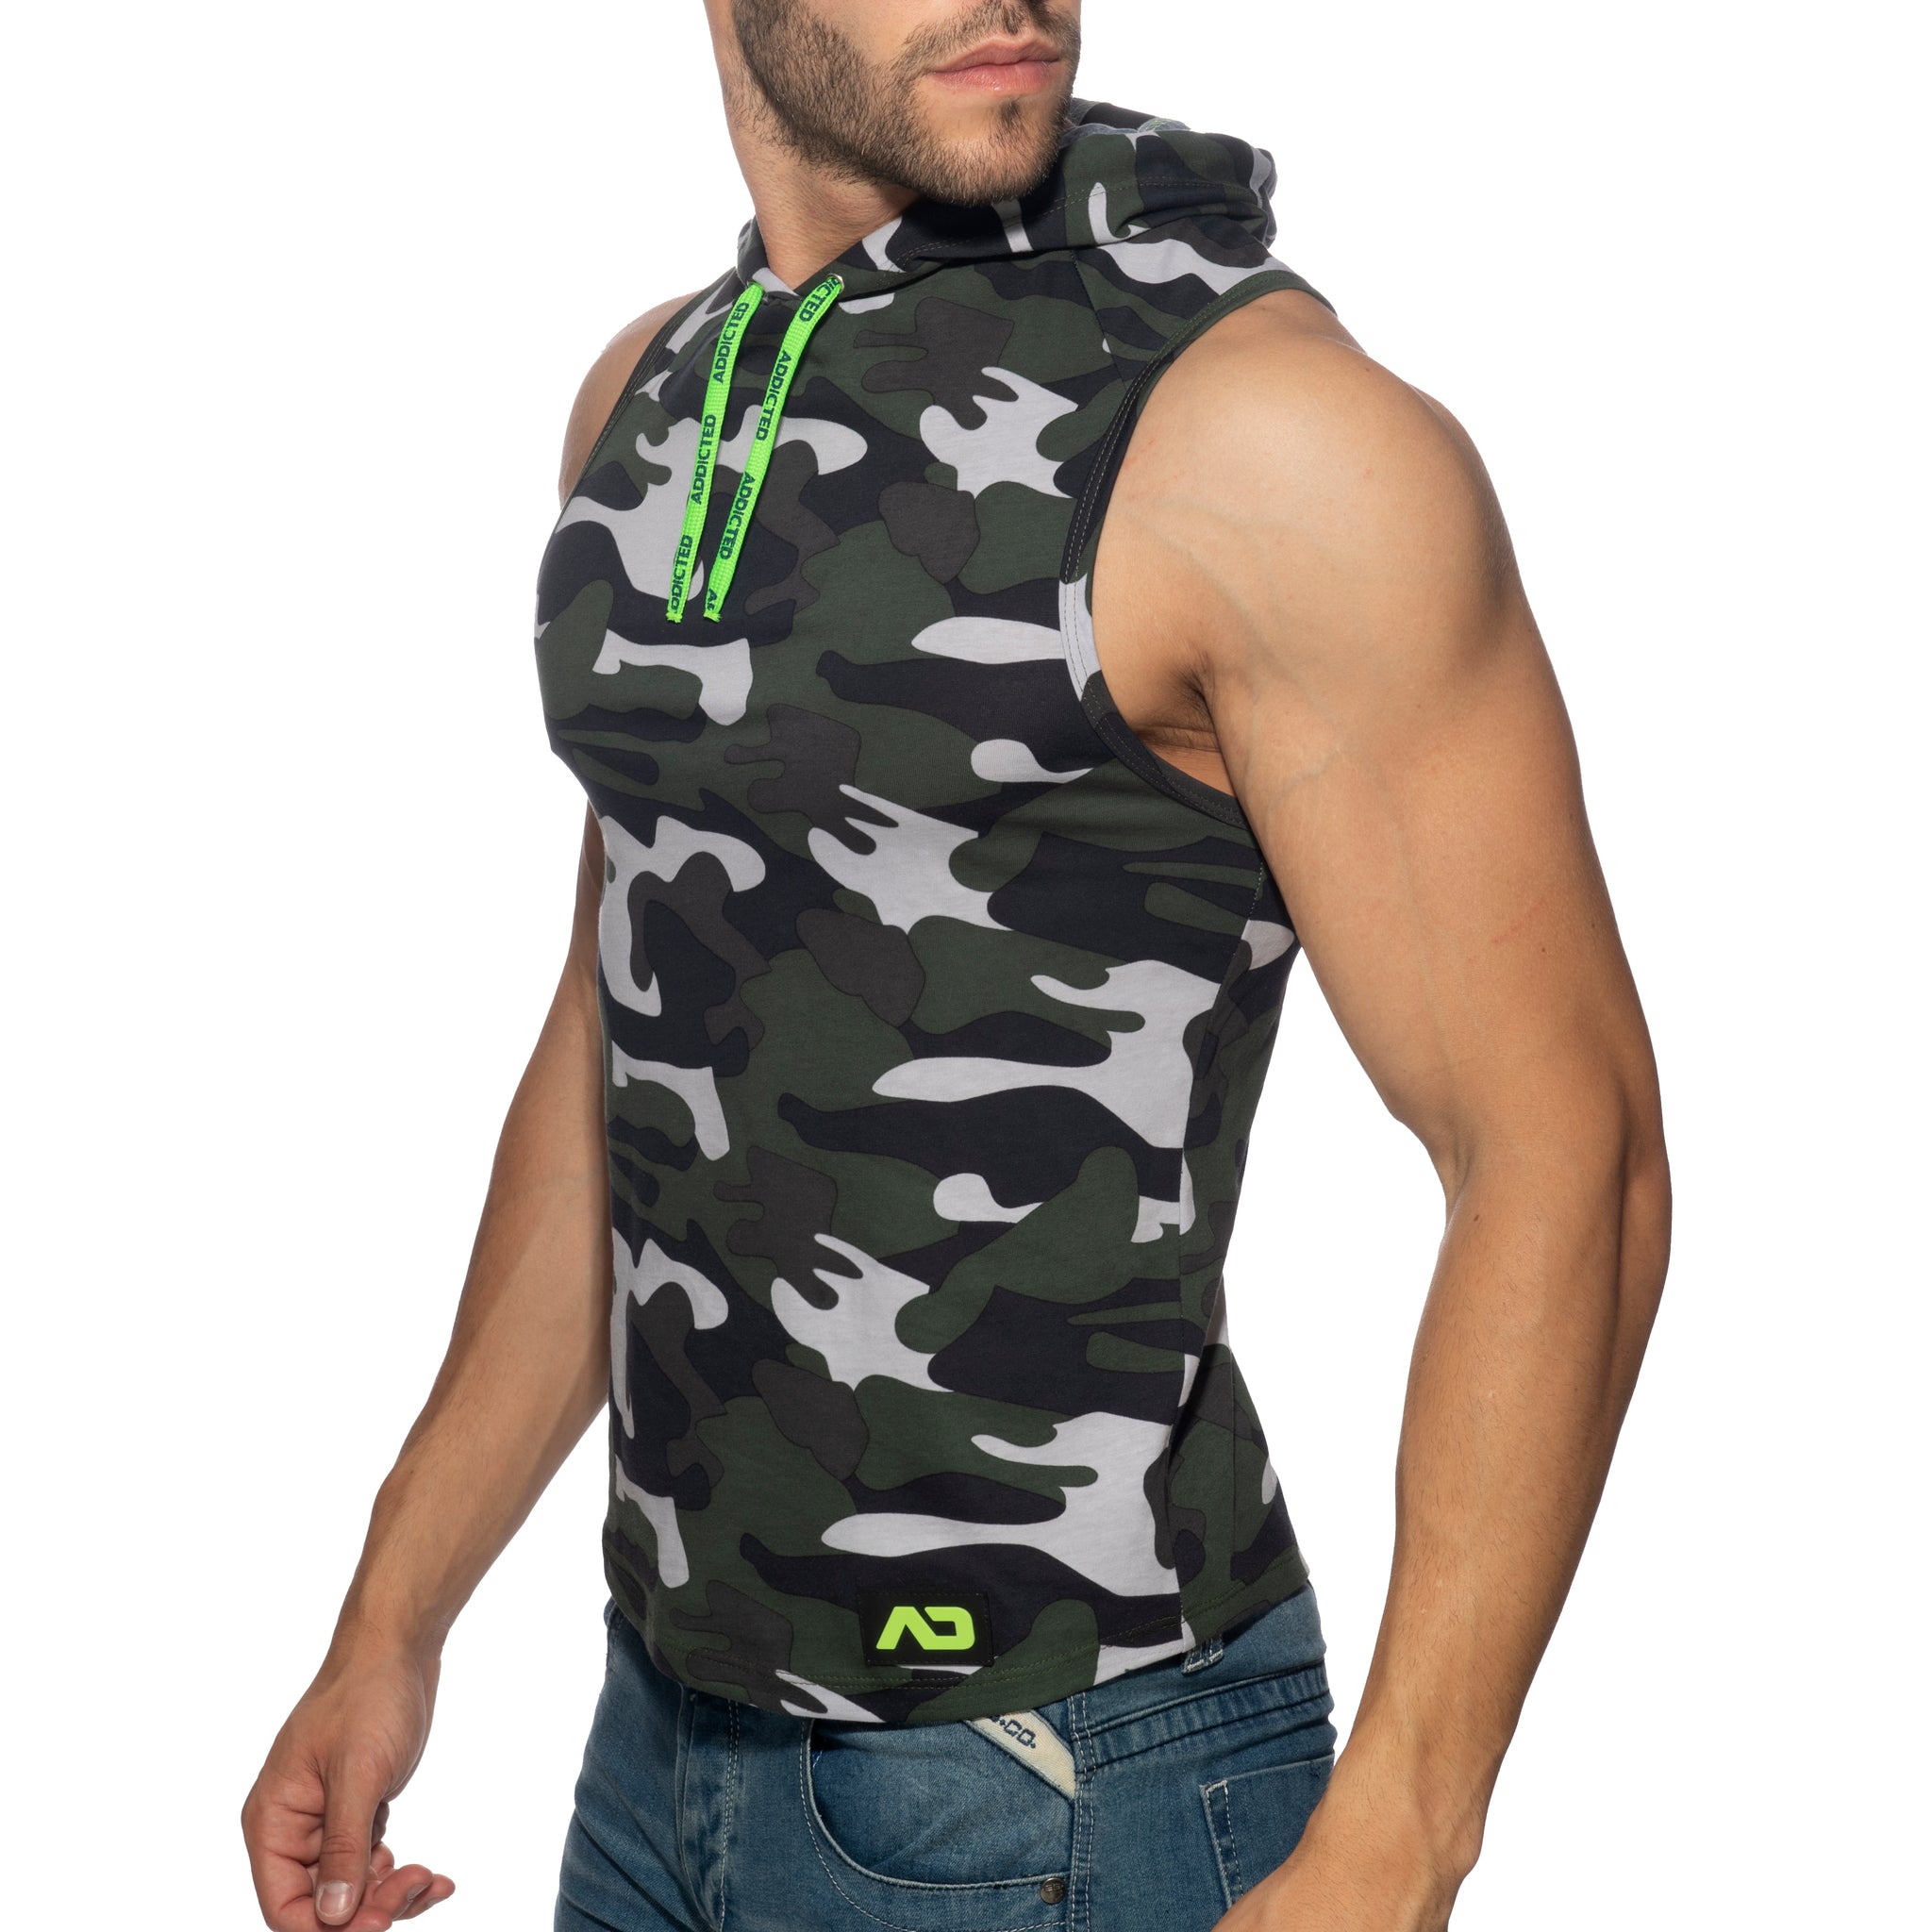 Addicted Band Cotton Hoody Camouflage AD1001